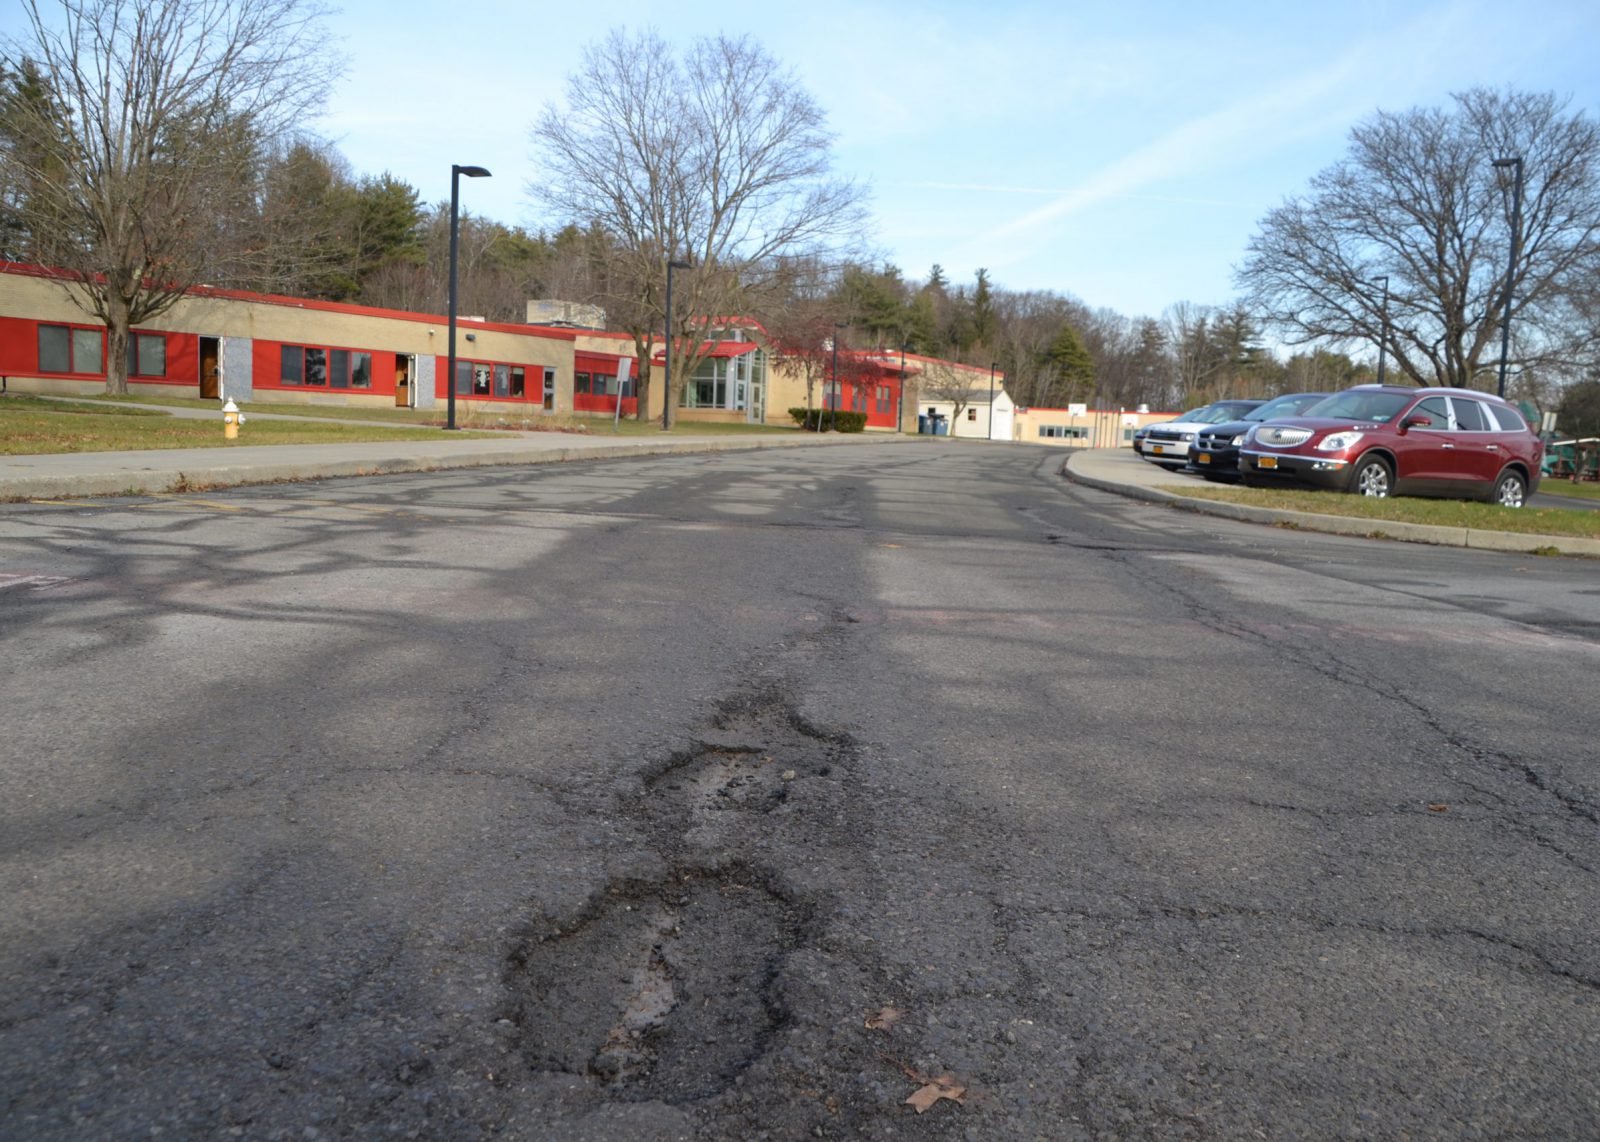 Pothole in the Rosendale roadway